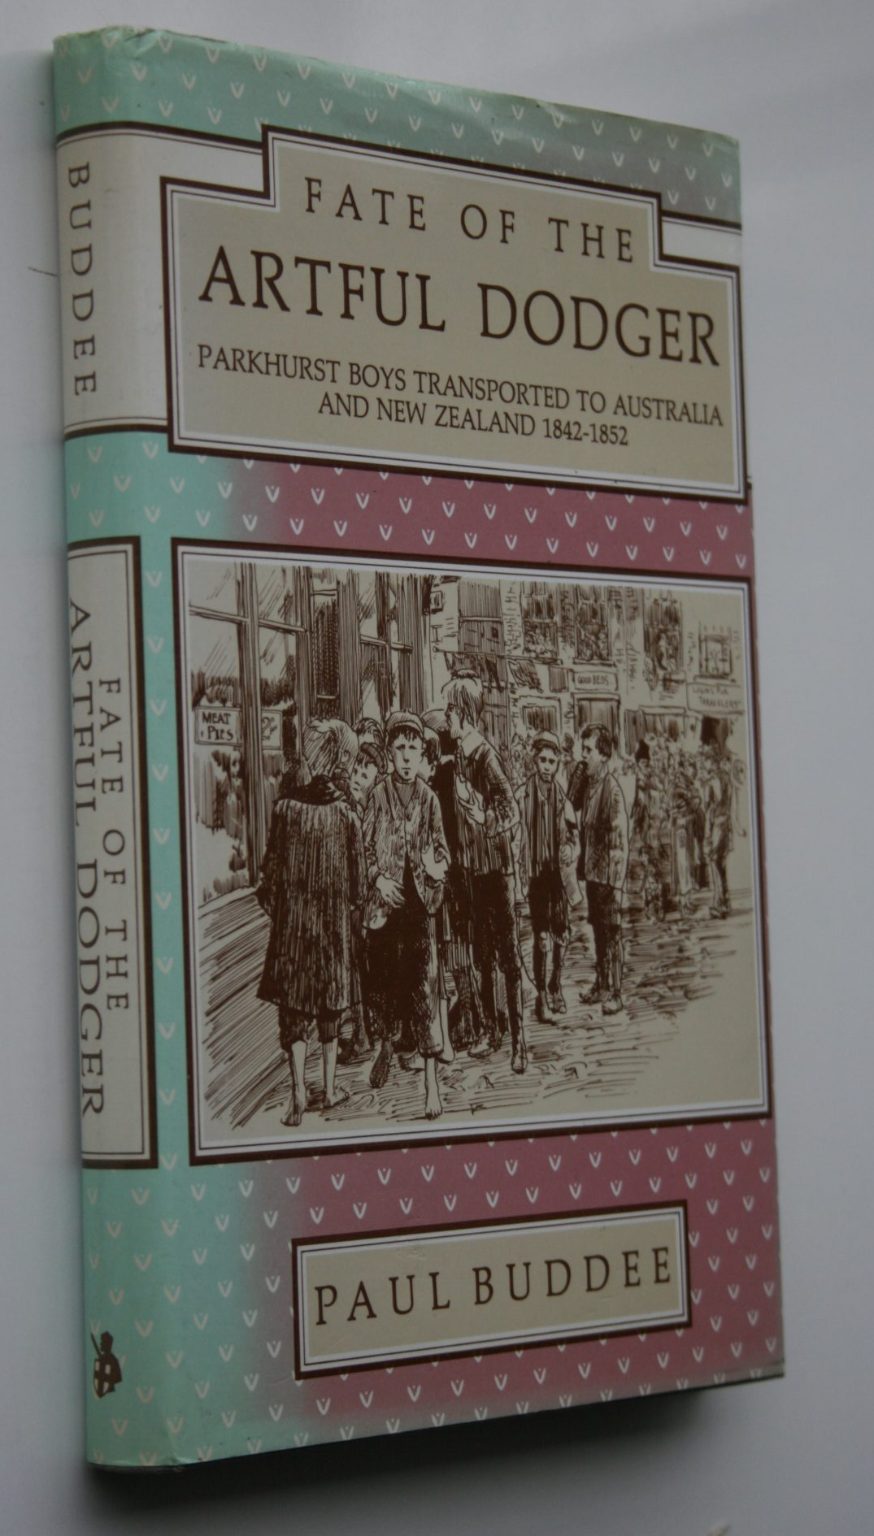 Fate of the Artful Dodger Parkhurst Boys Transported to Australia and New Zealand 1842-1852 By Paul Buddee.